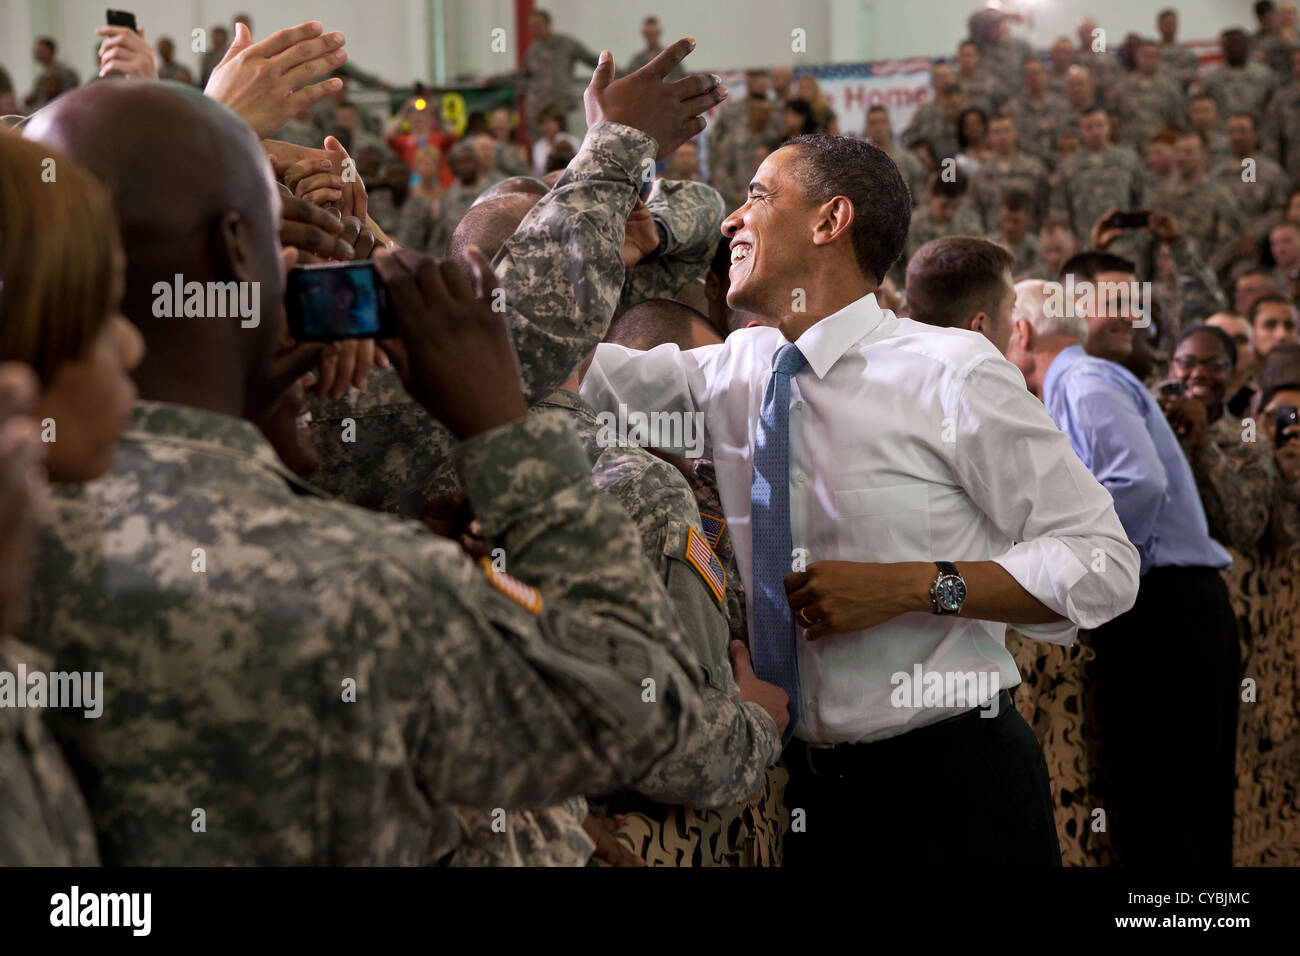 US President Barack Obama and Vice President Joe Biden shake hands with the troops following the President's remarks May 6, 2011 at Fort Campbell, Kentucky. Stock Photo